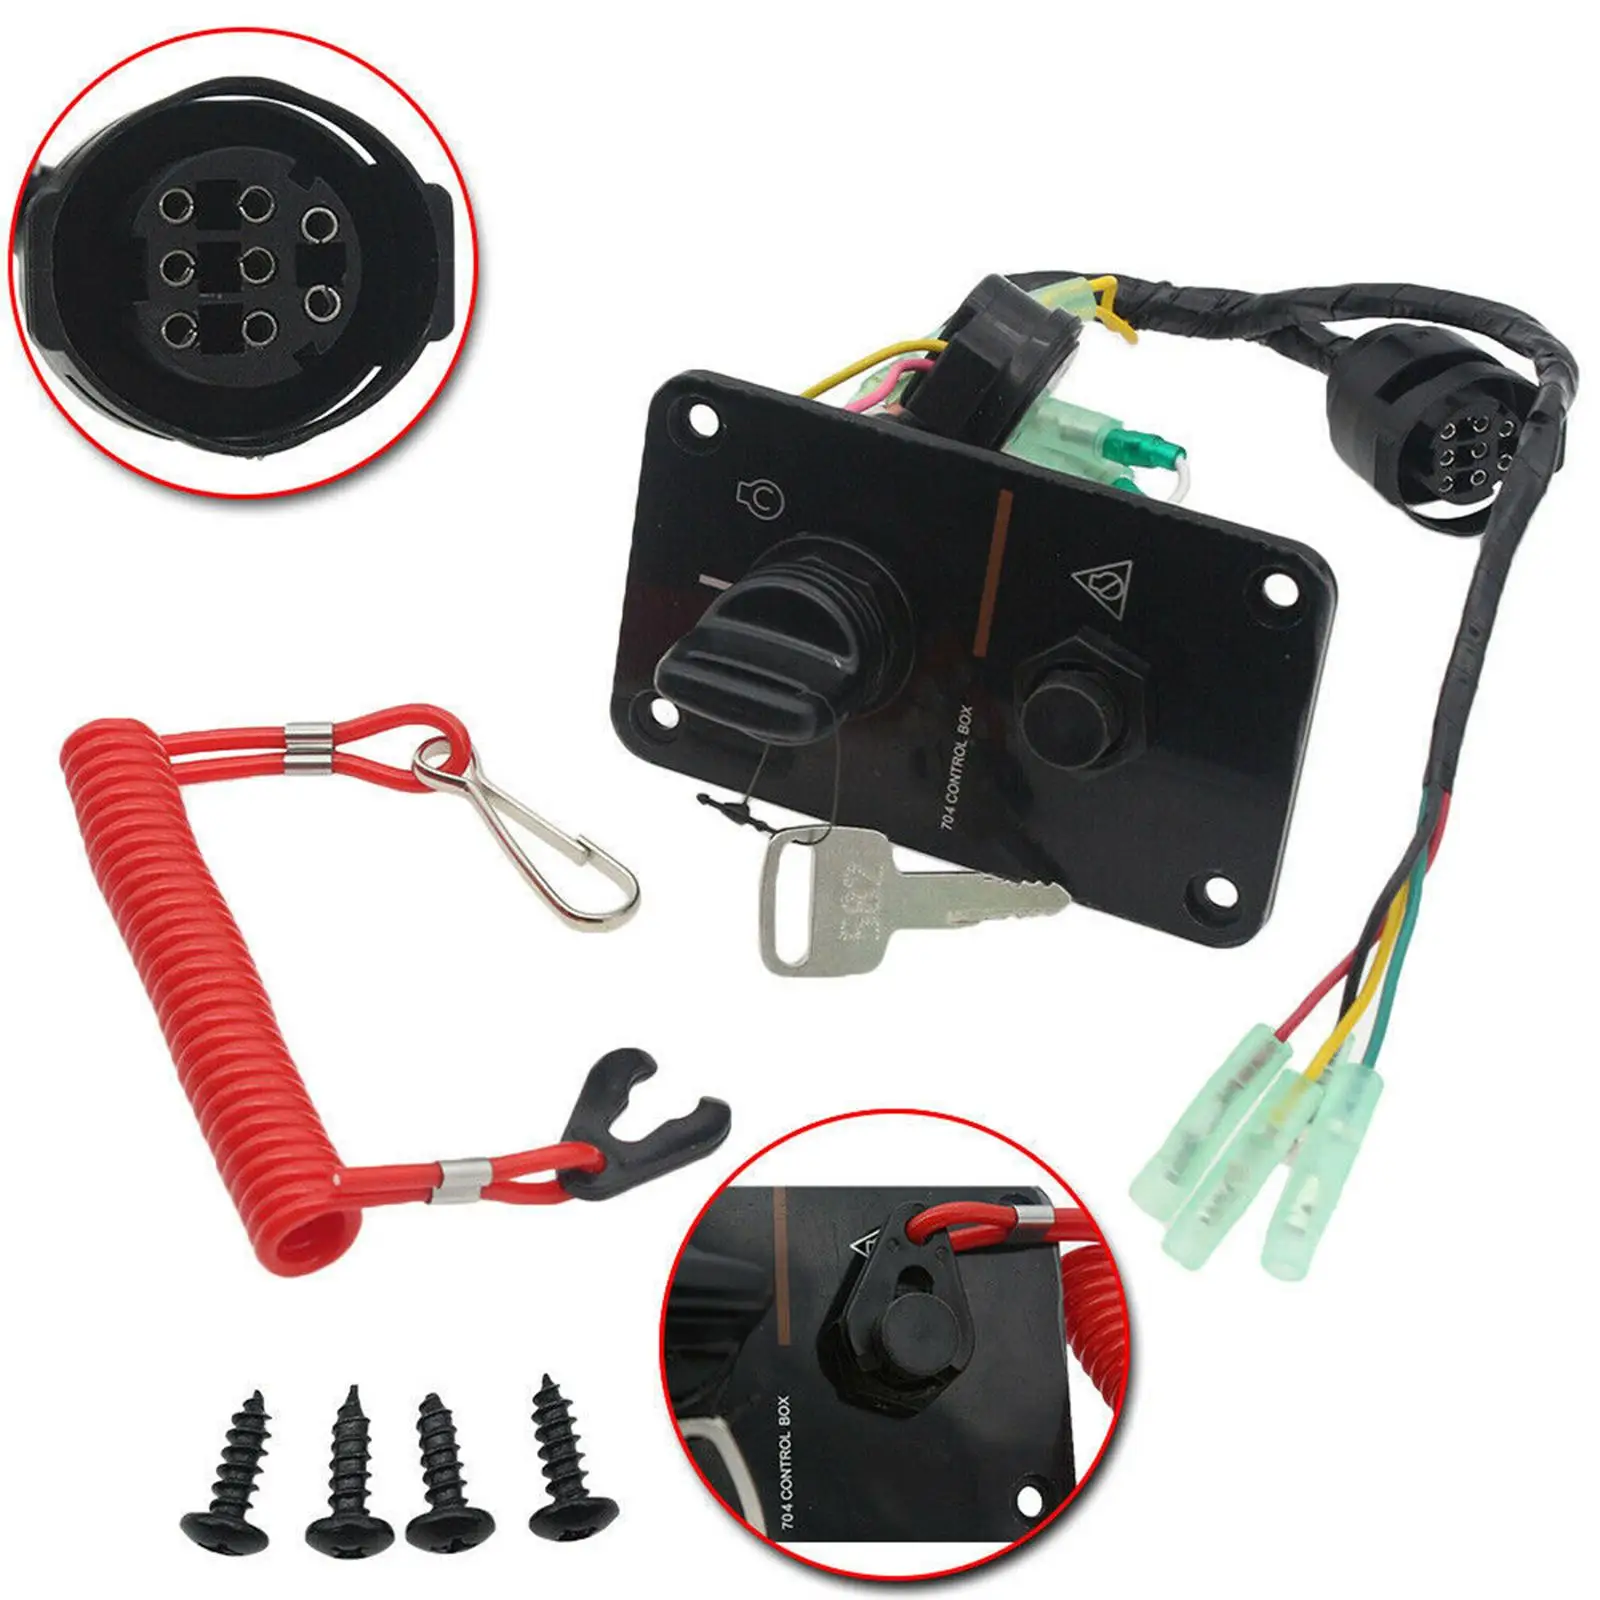 Outboard Single Engine Key Switch Panel, 704-82570-08-00 for Outboard Motors with Stop Switch Lanyard Mounting Screws  Yacht